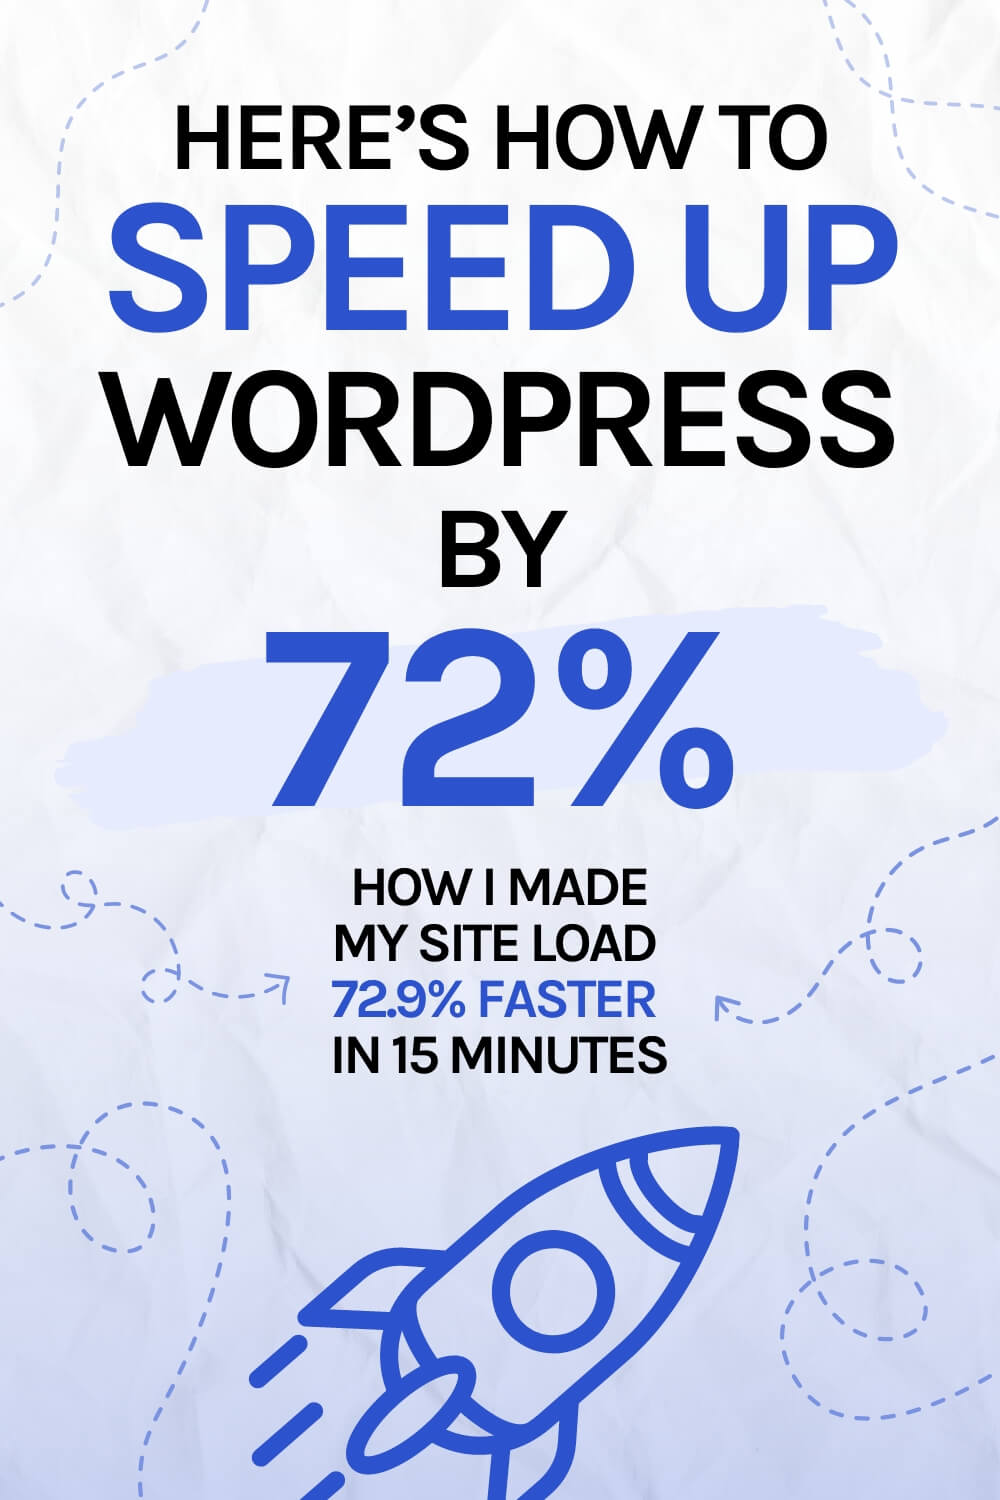 How to speed up WordPress with the WP Rocket caching plugin